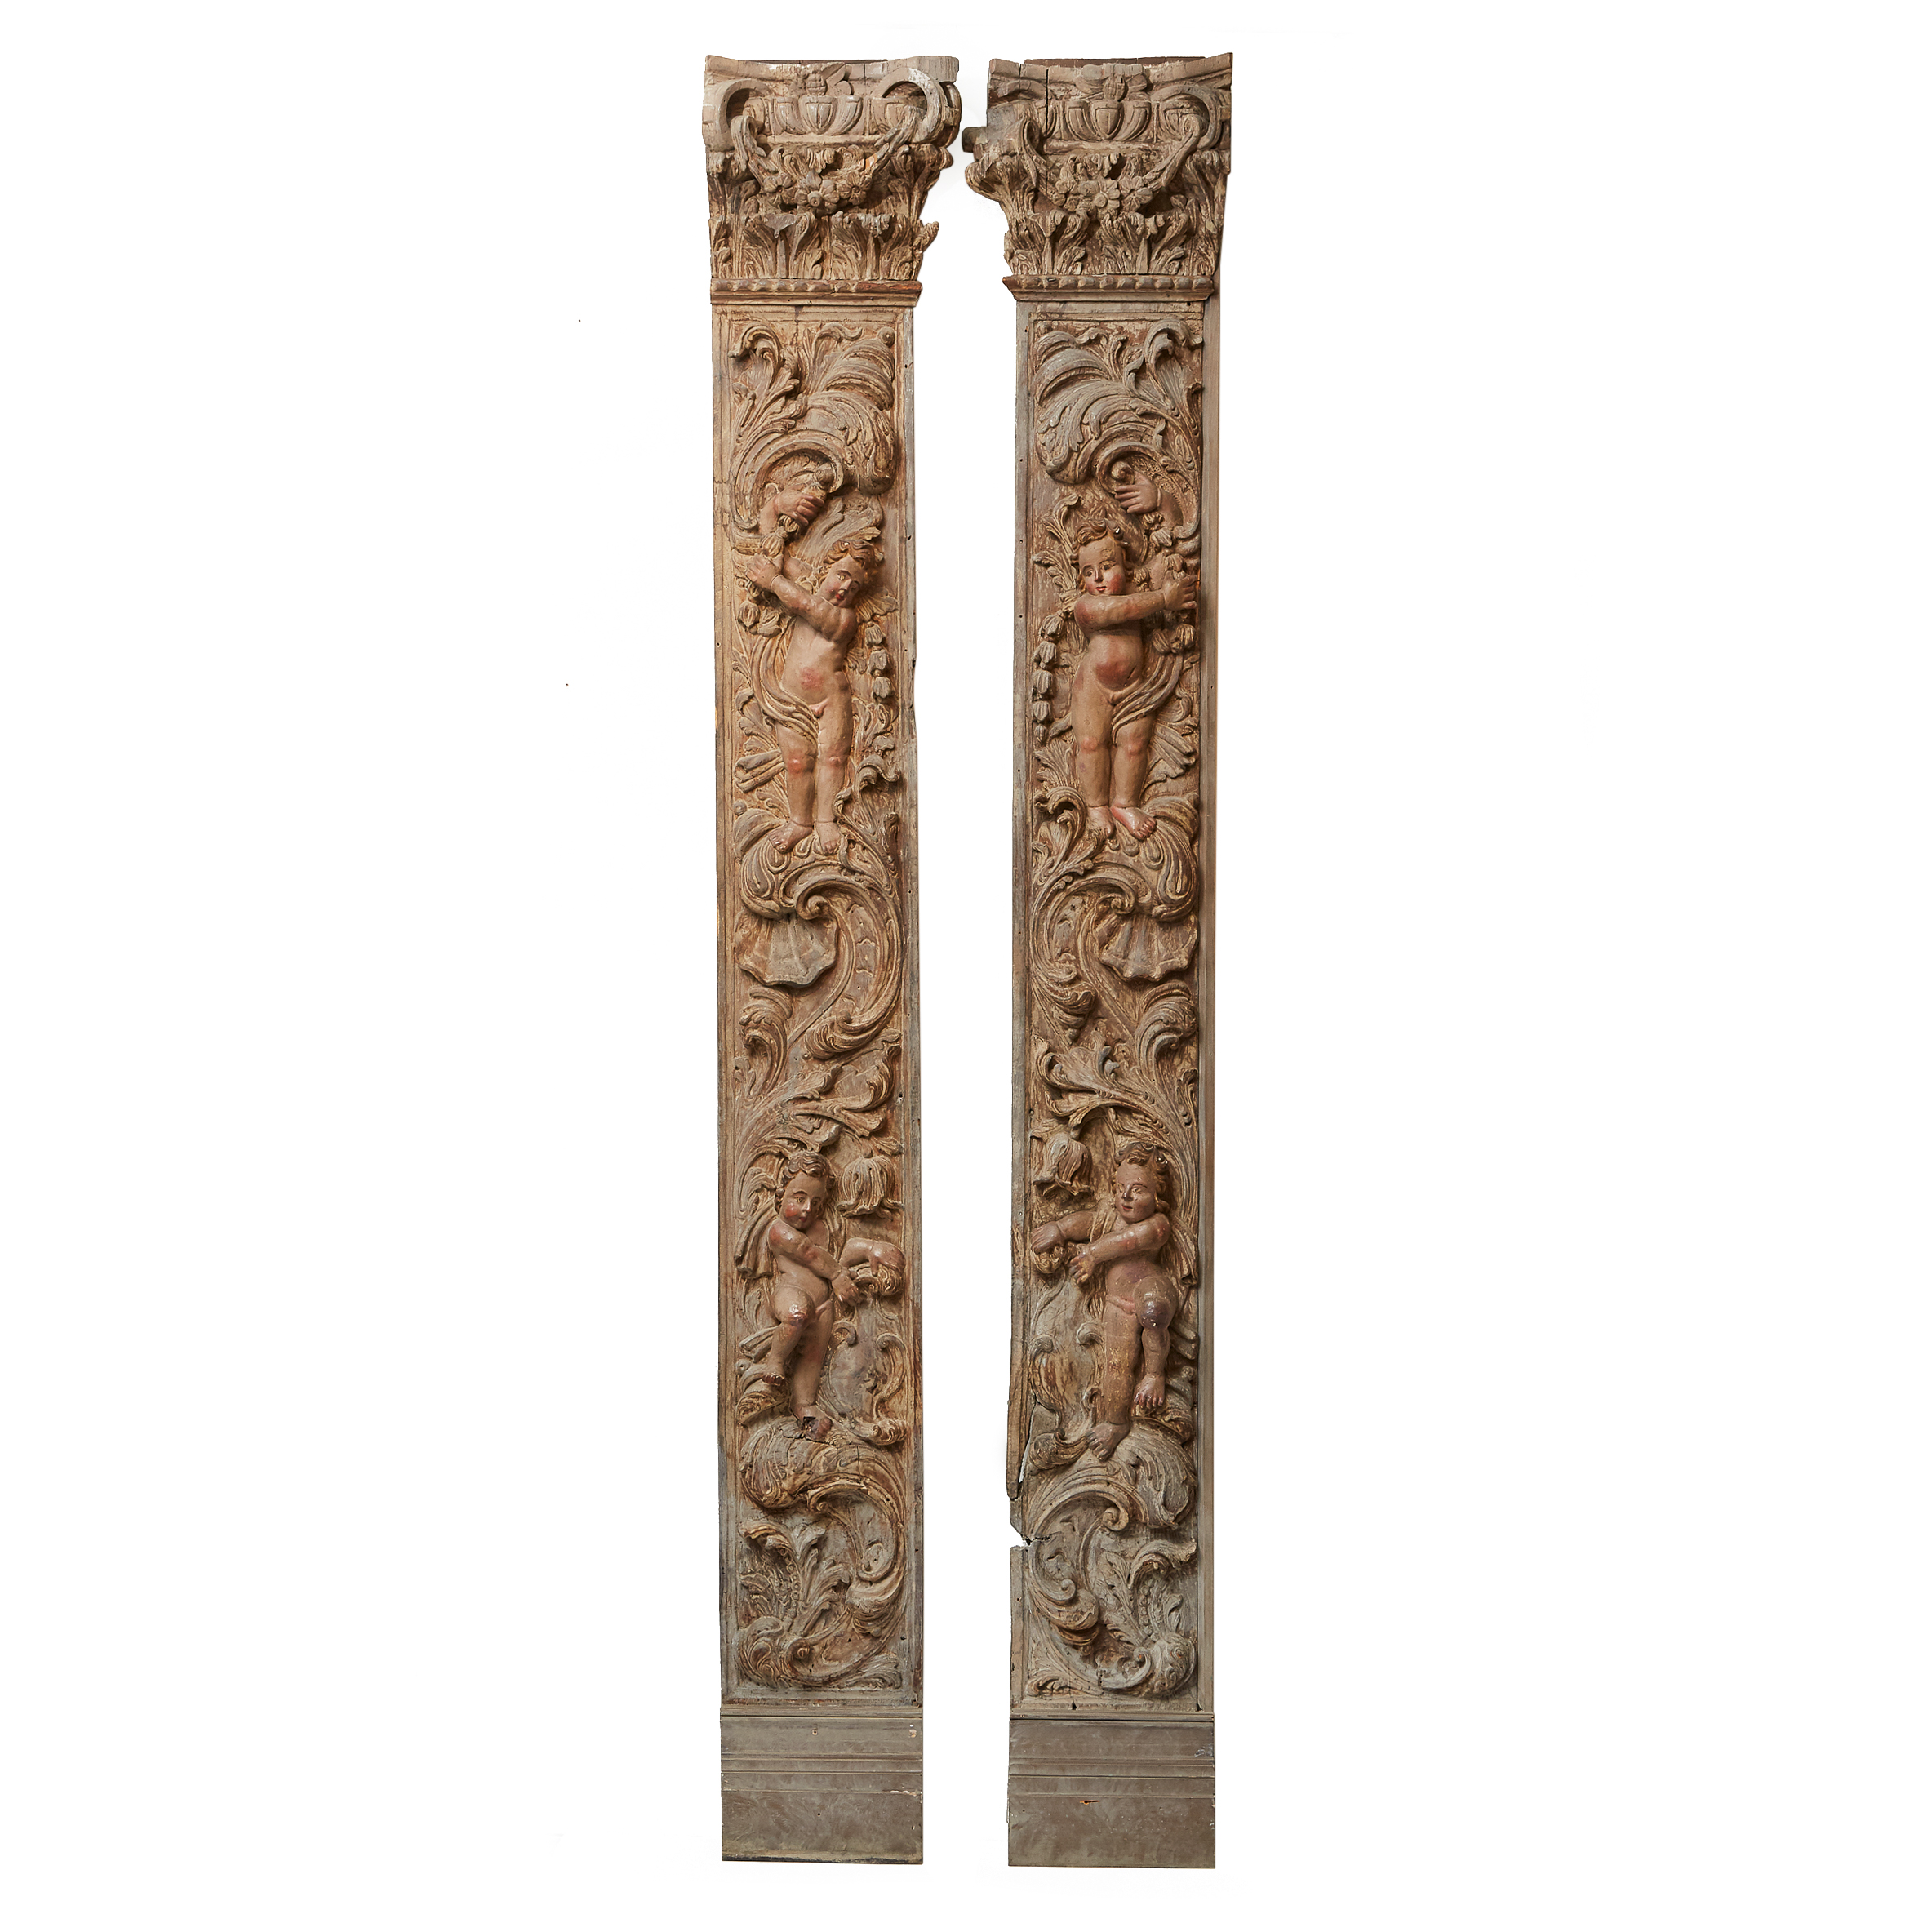 Pair of Italian Rococo Polychromed Pilasters, 18th century